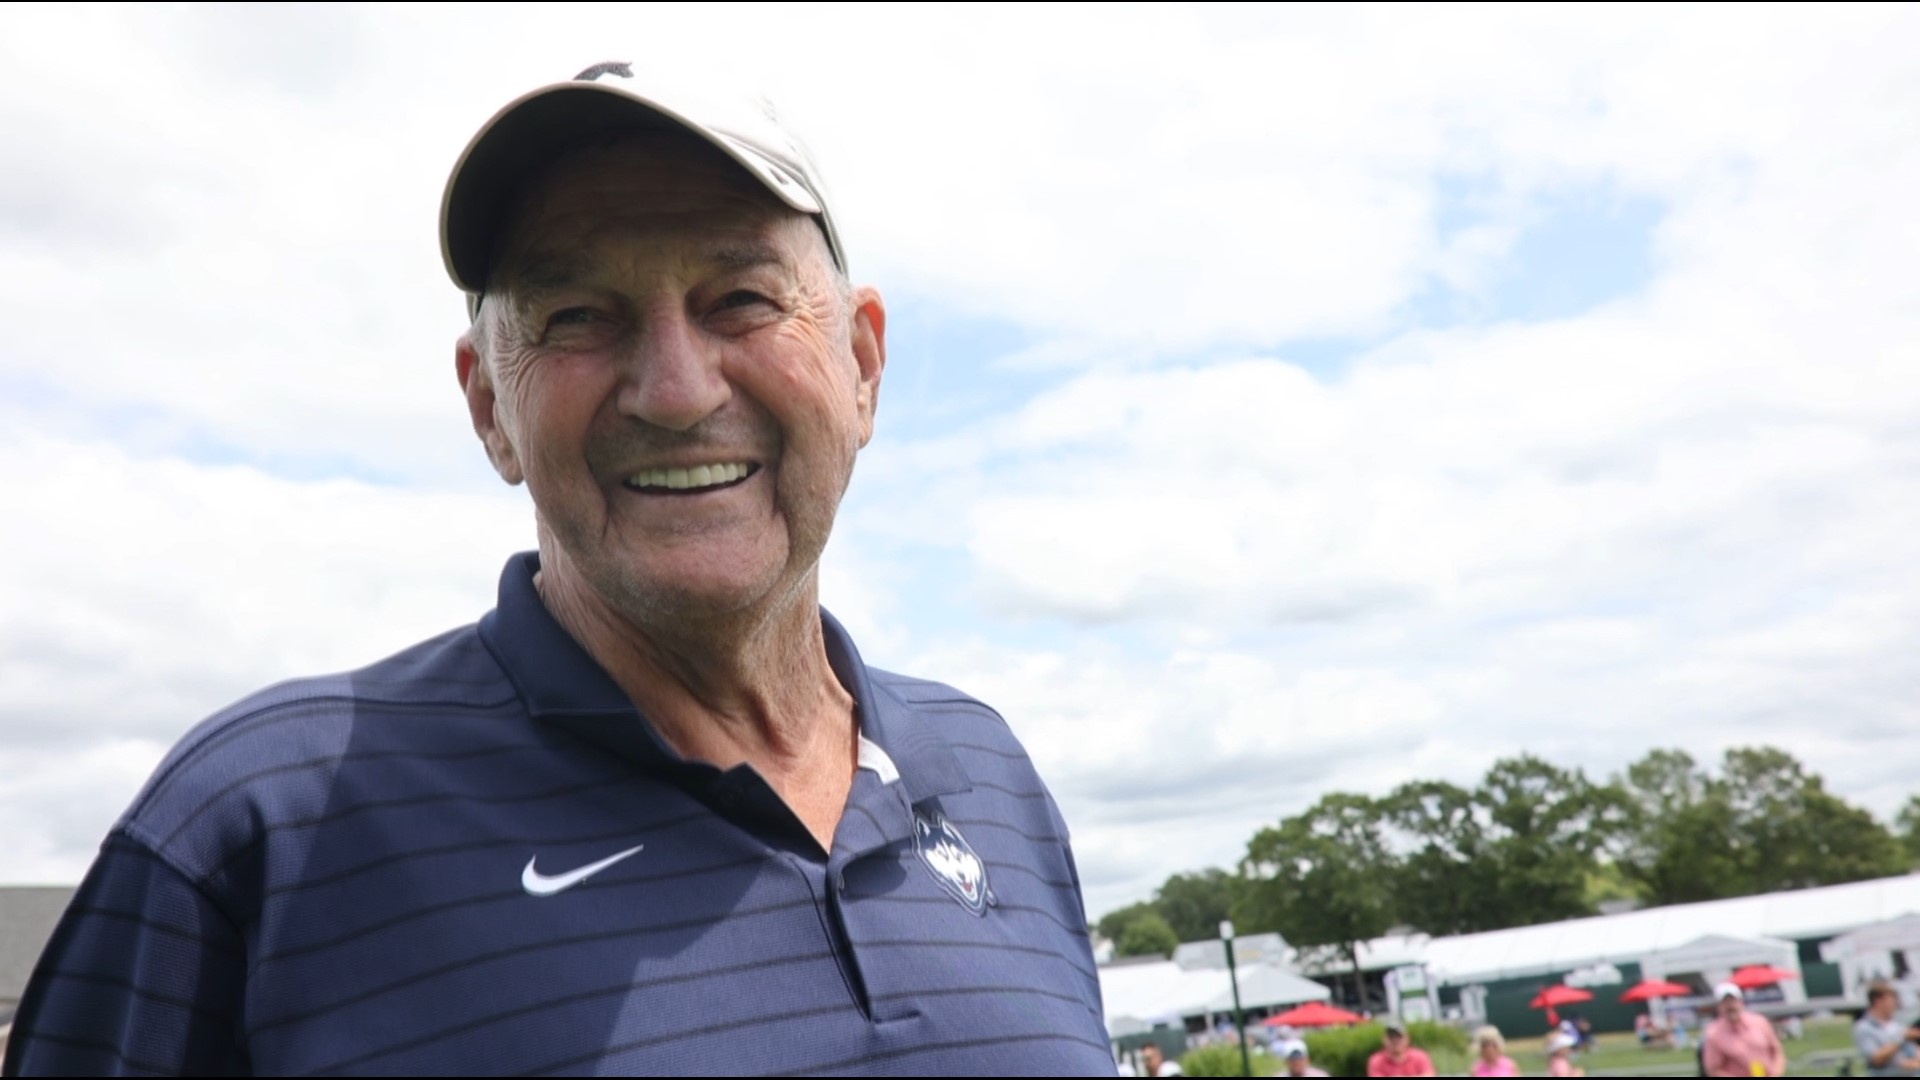 Celebrities answer rapid-fire golf questions at Travelers Championship Pro-Am fox61